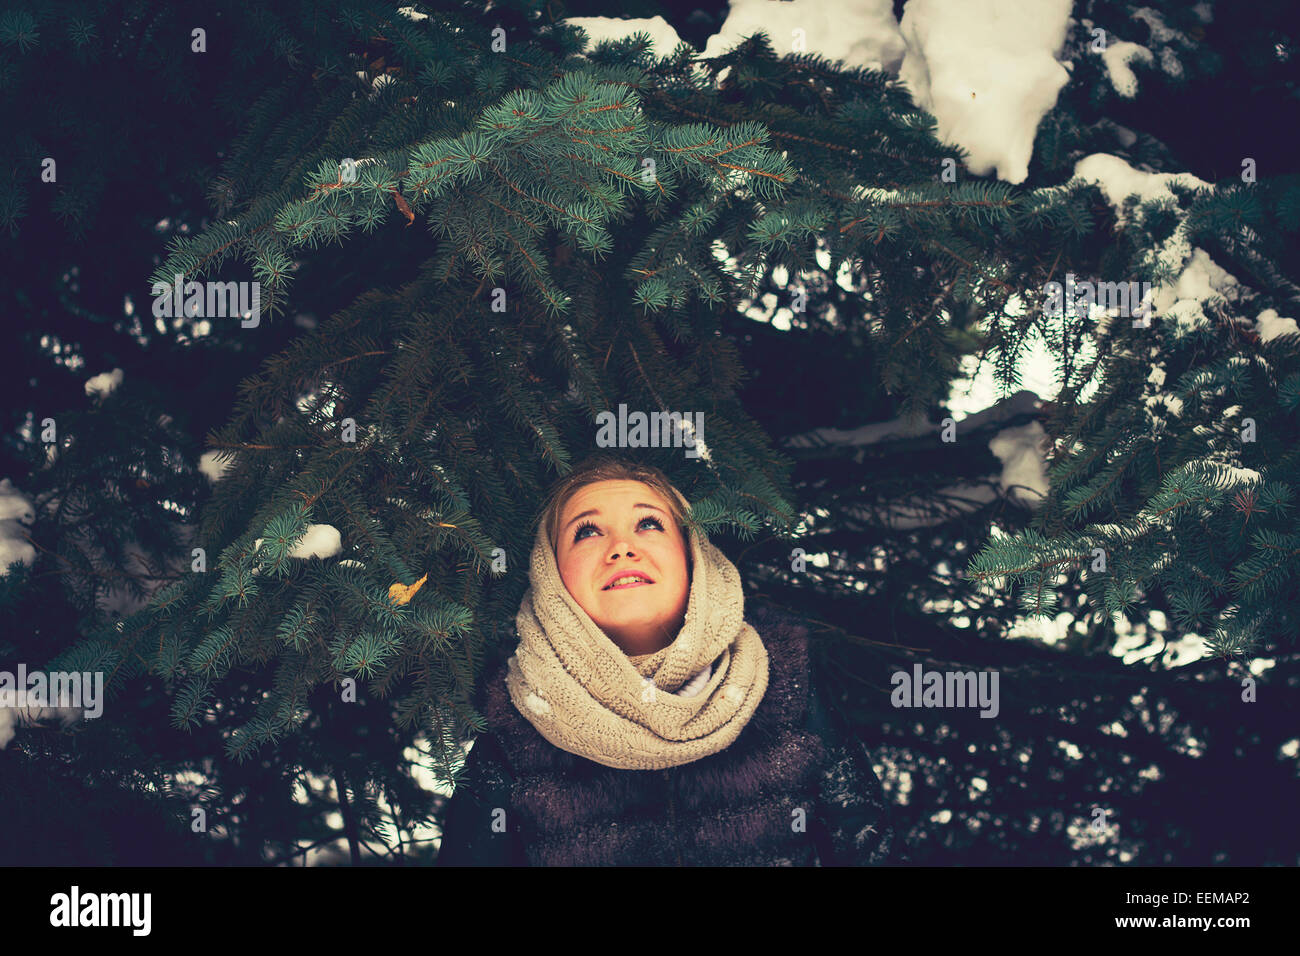 Caucasian woman standing under evergreen tree branches Stock Photo